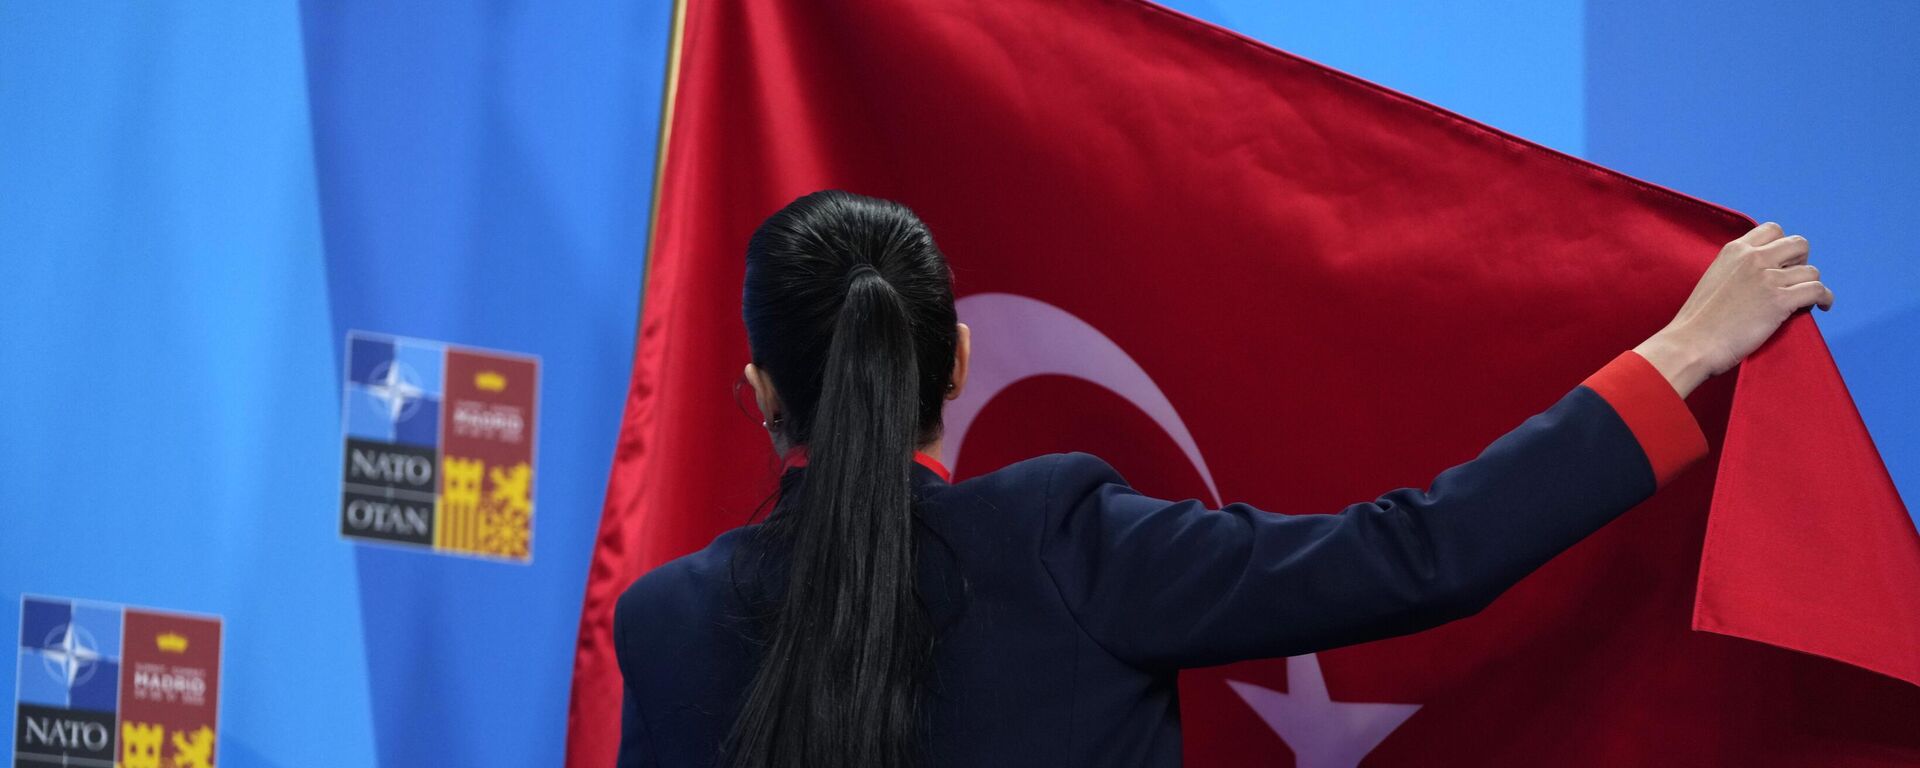 A member of the Turkish delegation adjusts the flag prior to an address by Turkish President Recep Tayyip Erdogan at a NATO summit in Madrid, Spain  - Sputnik International, 1920, 27.02.2023